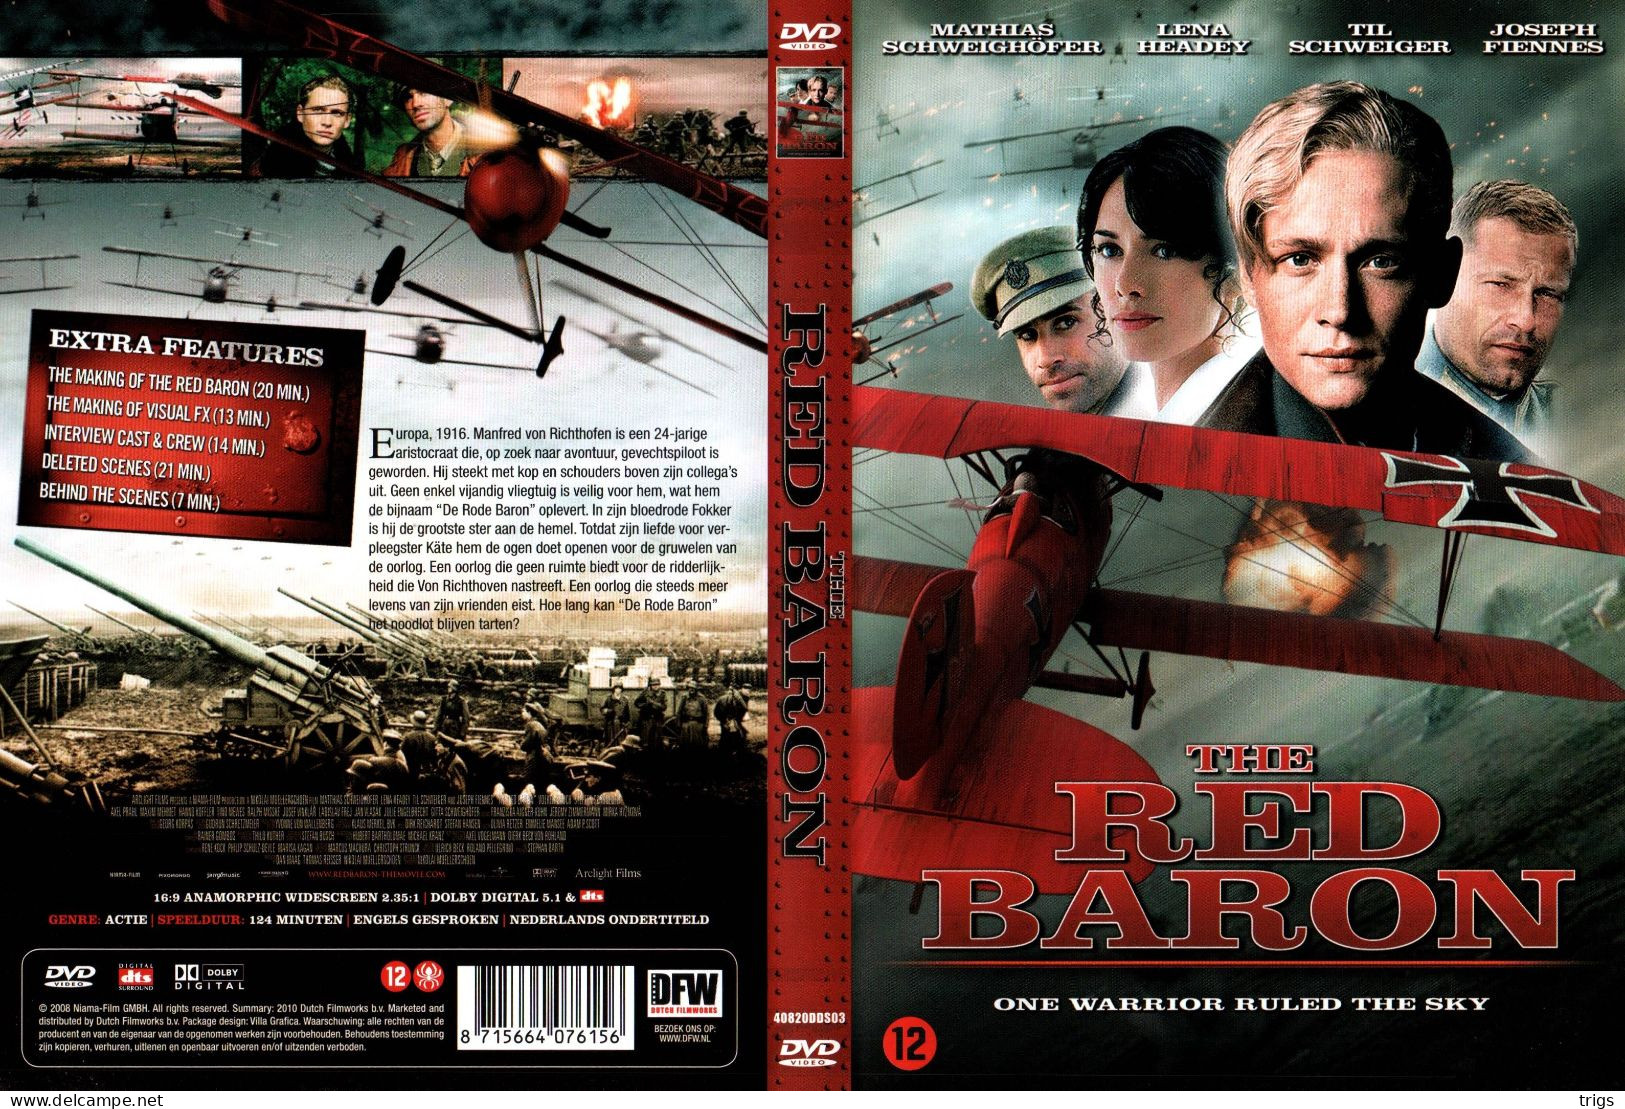 DVD - The Red Baron - Action, Adventure